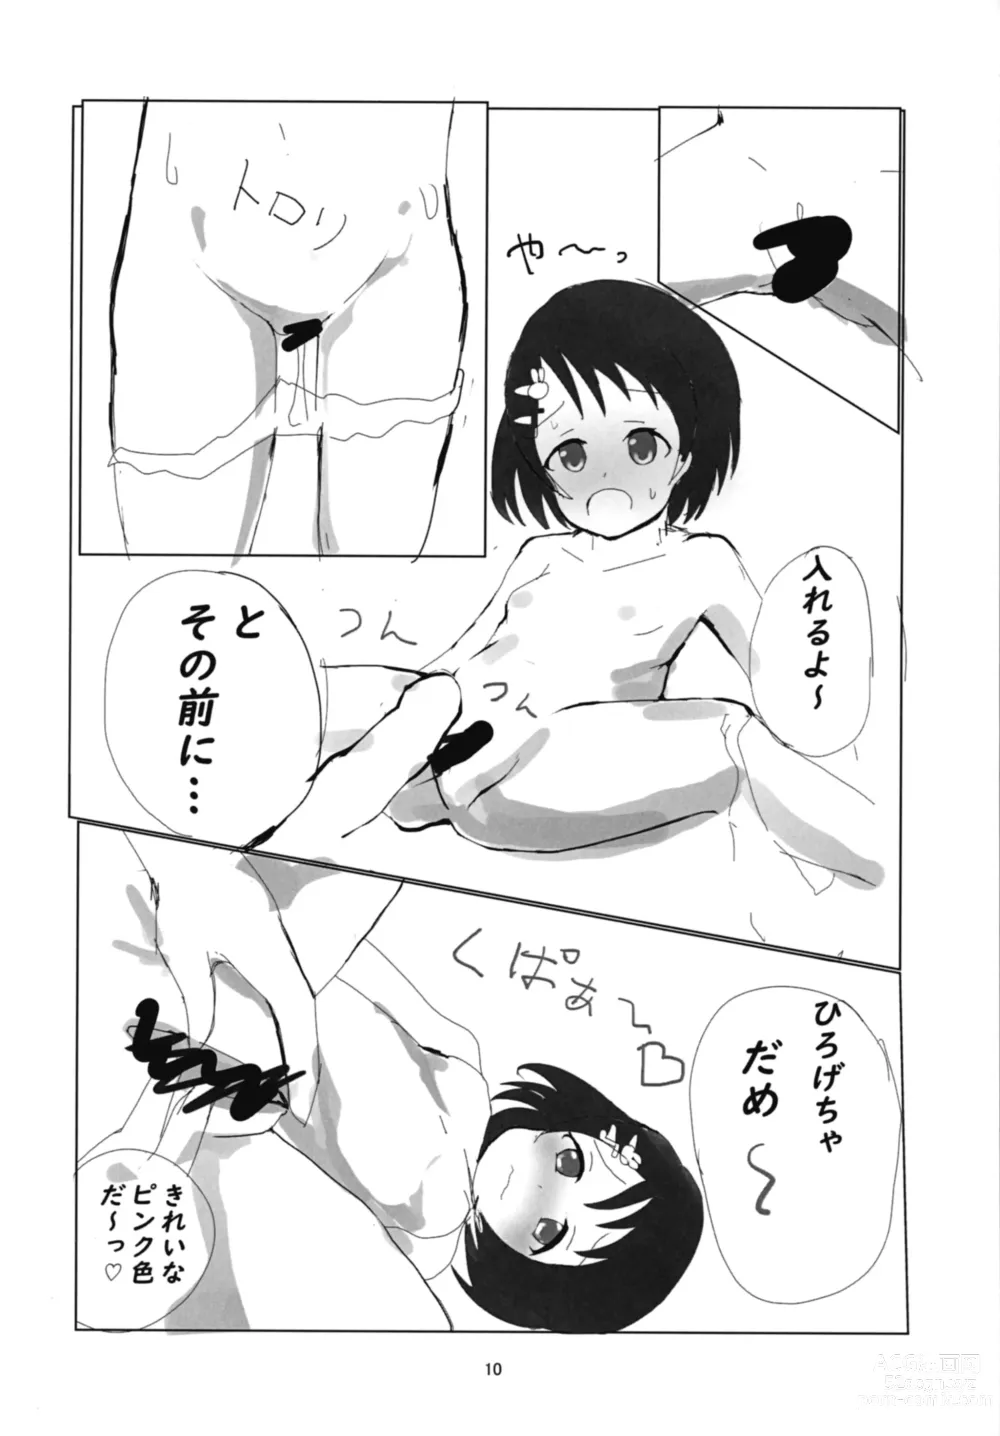 Page 10 of doujinshi you spoil me a lot